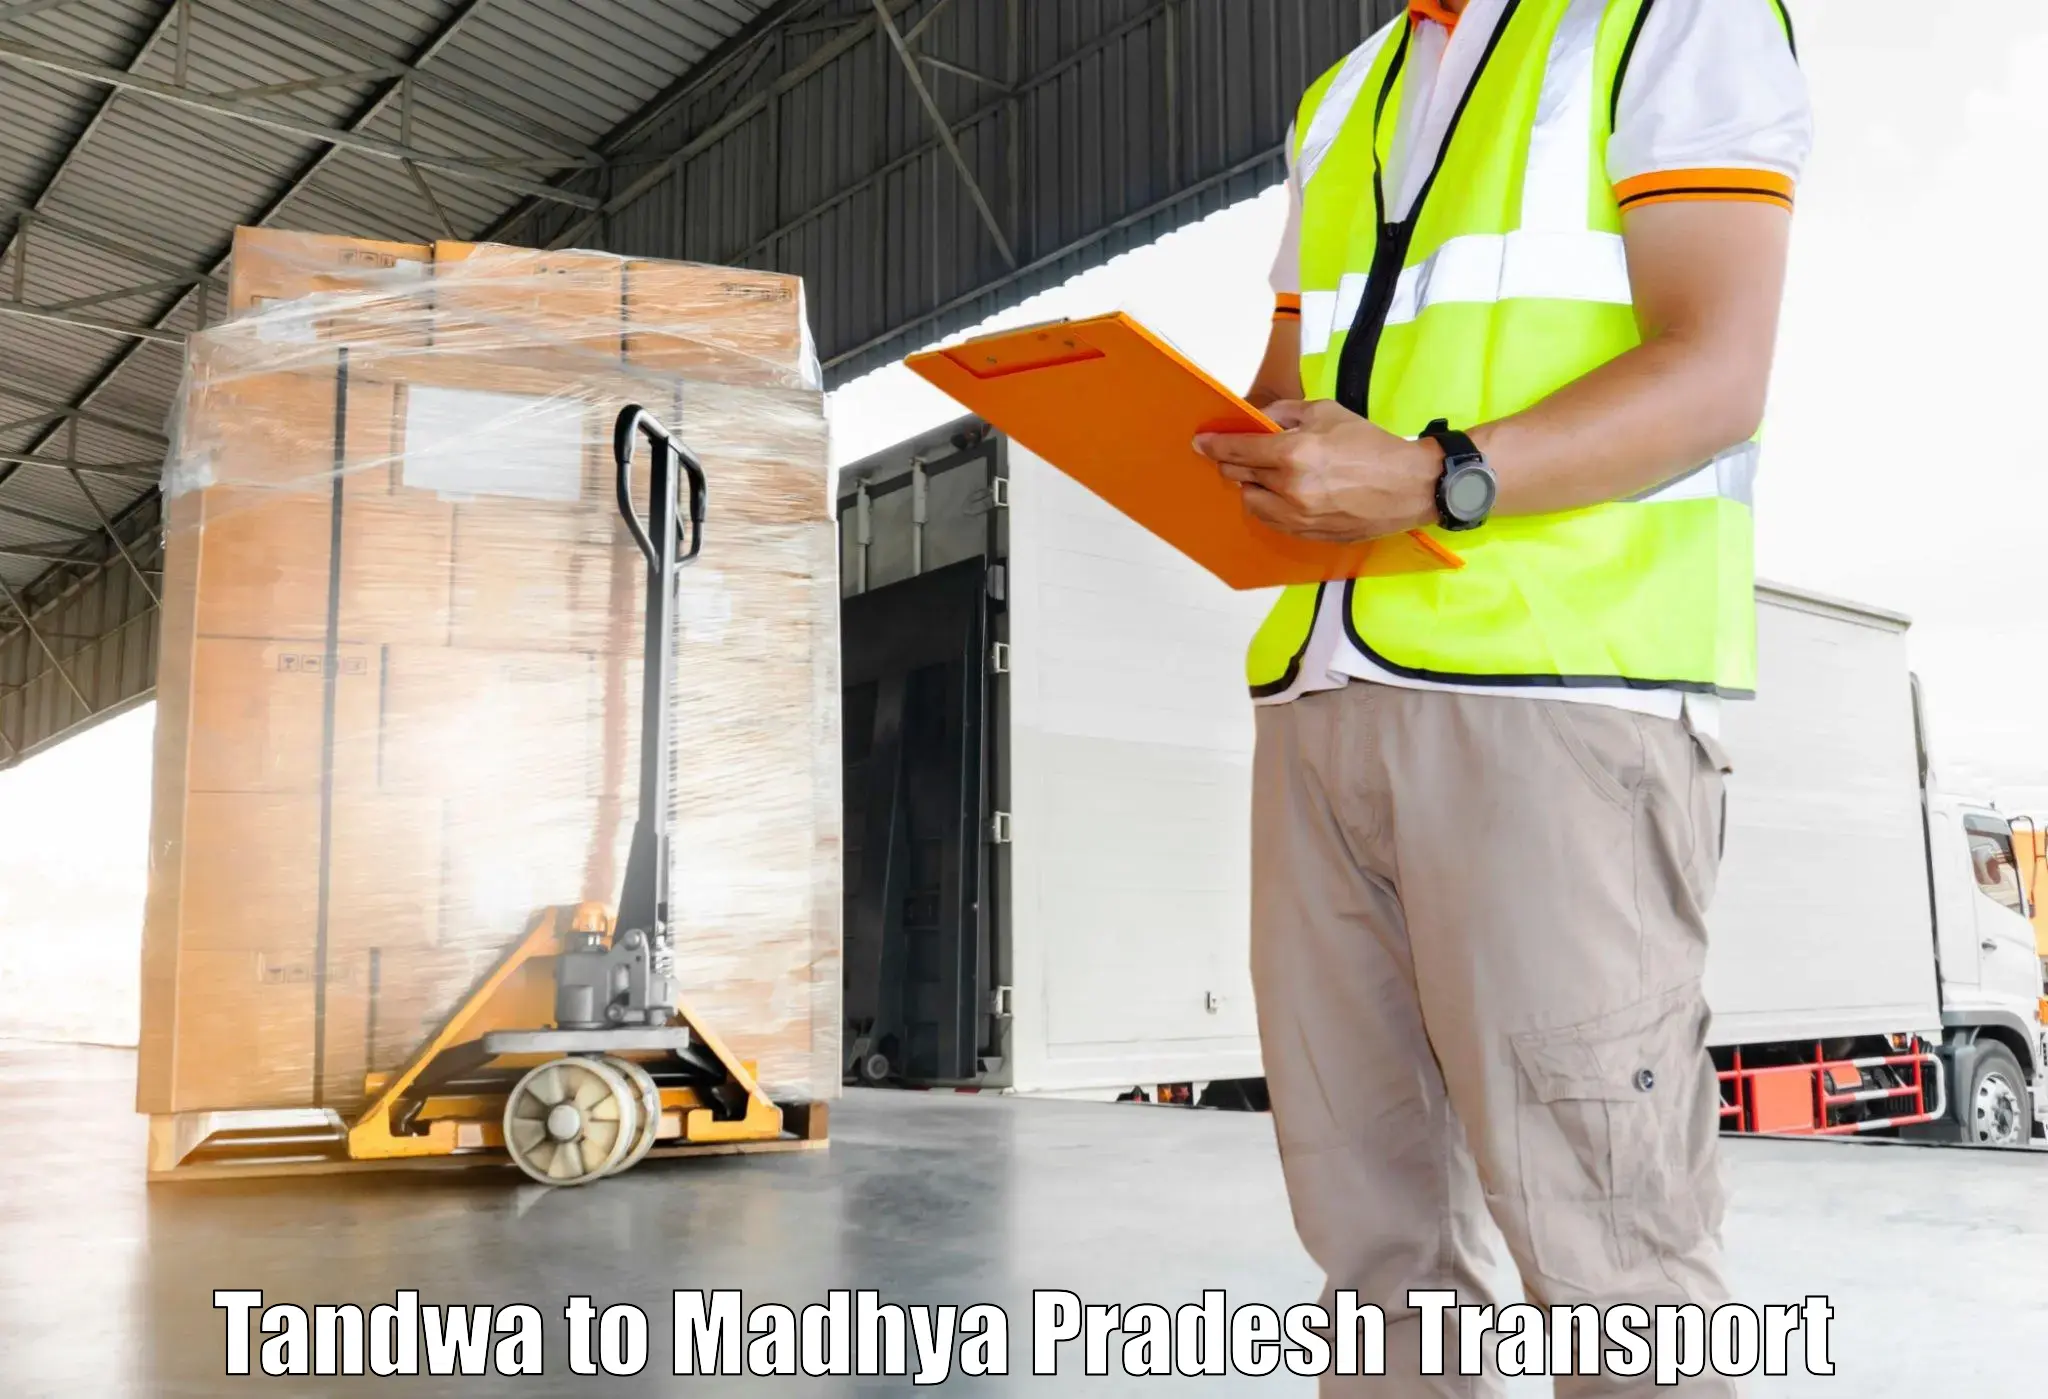 Truck transport companies in India Tandwa to Sehore